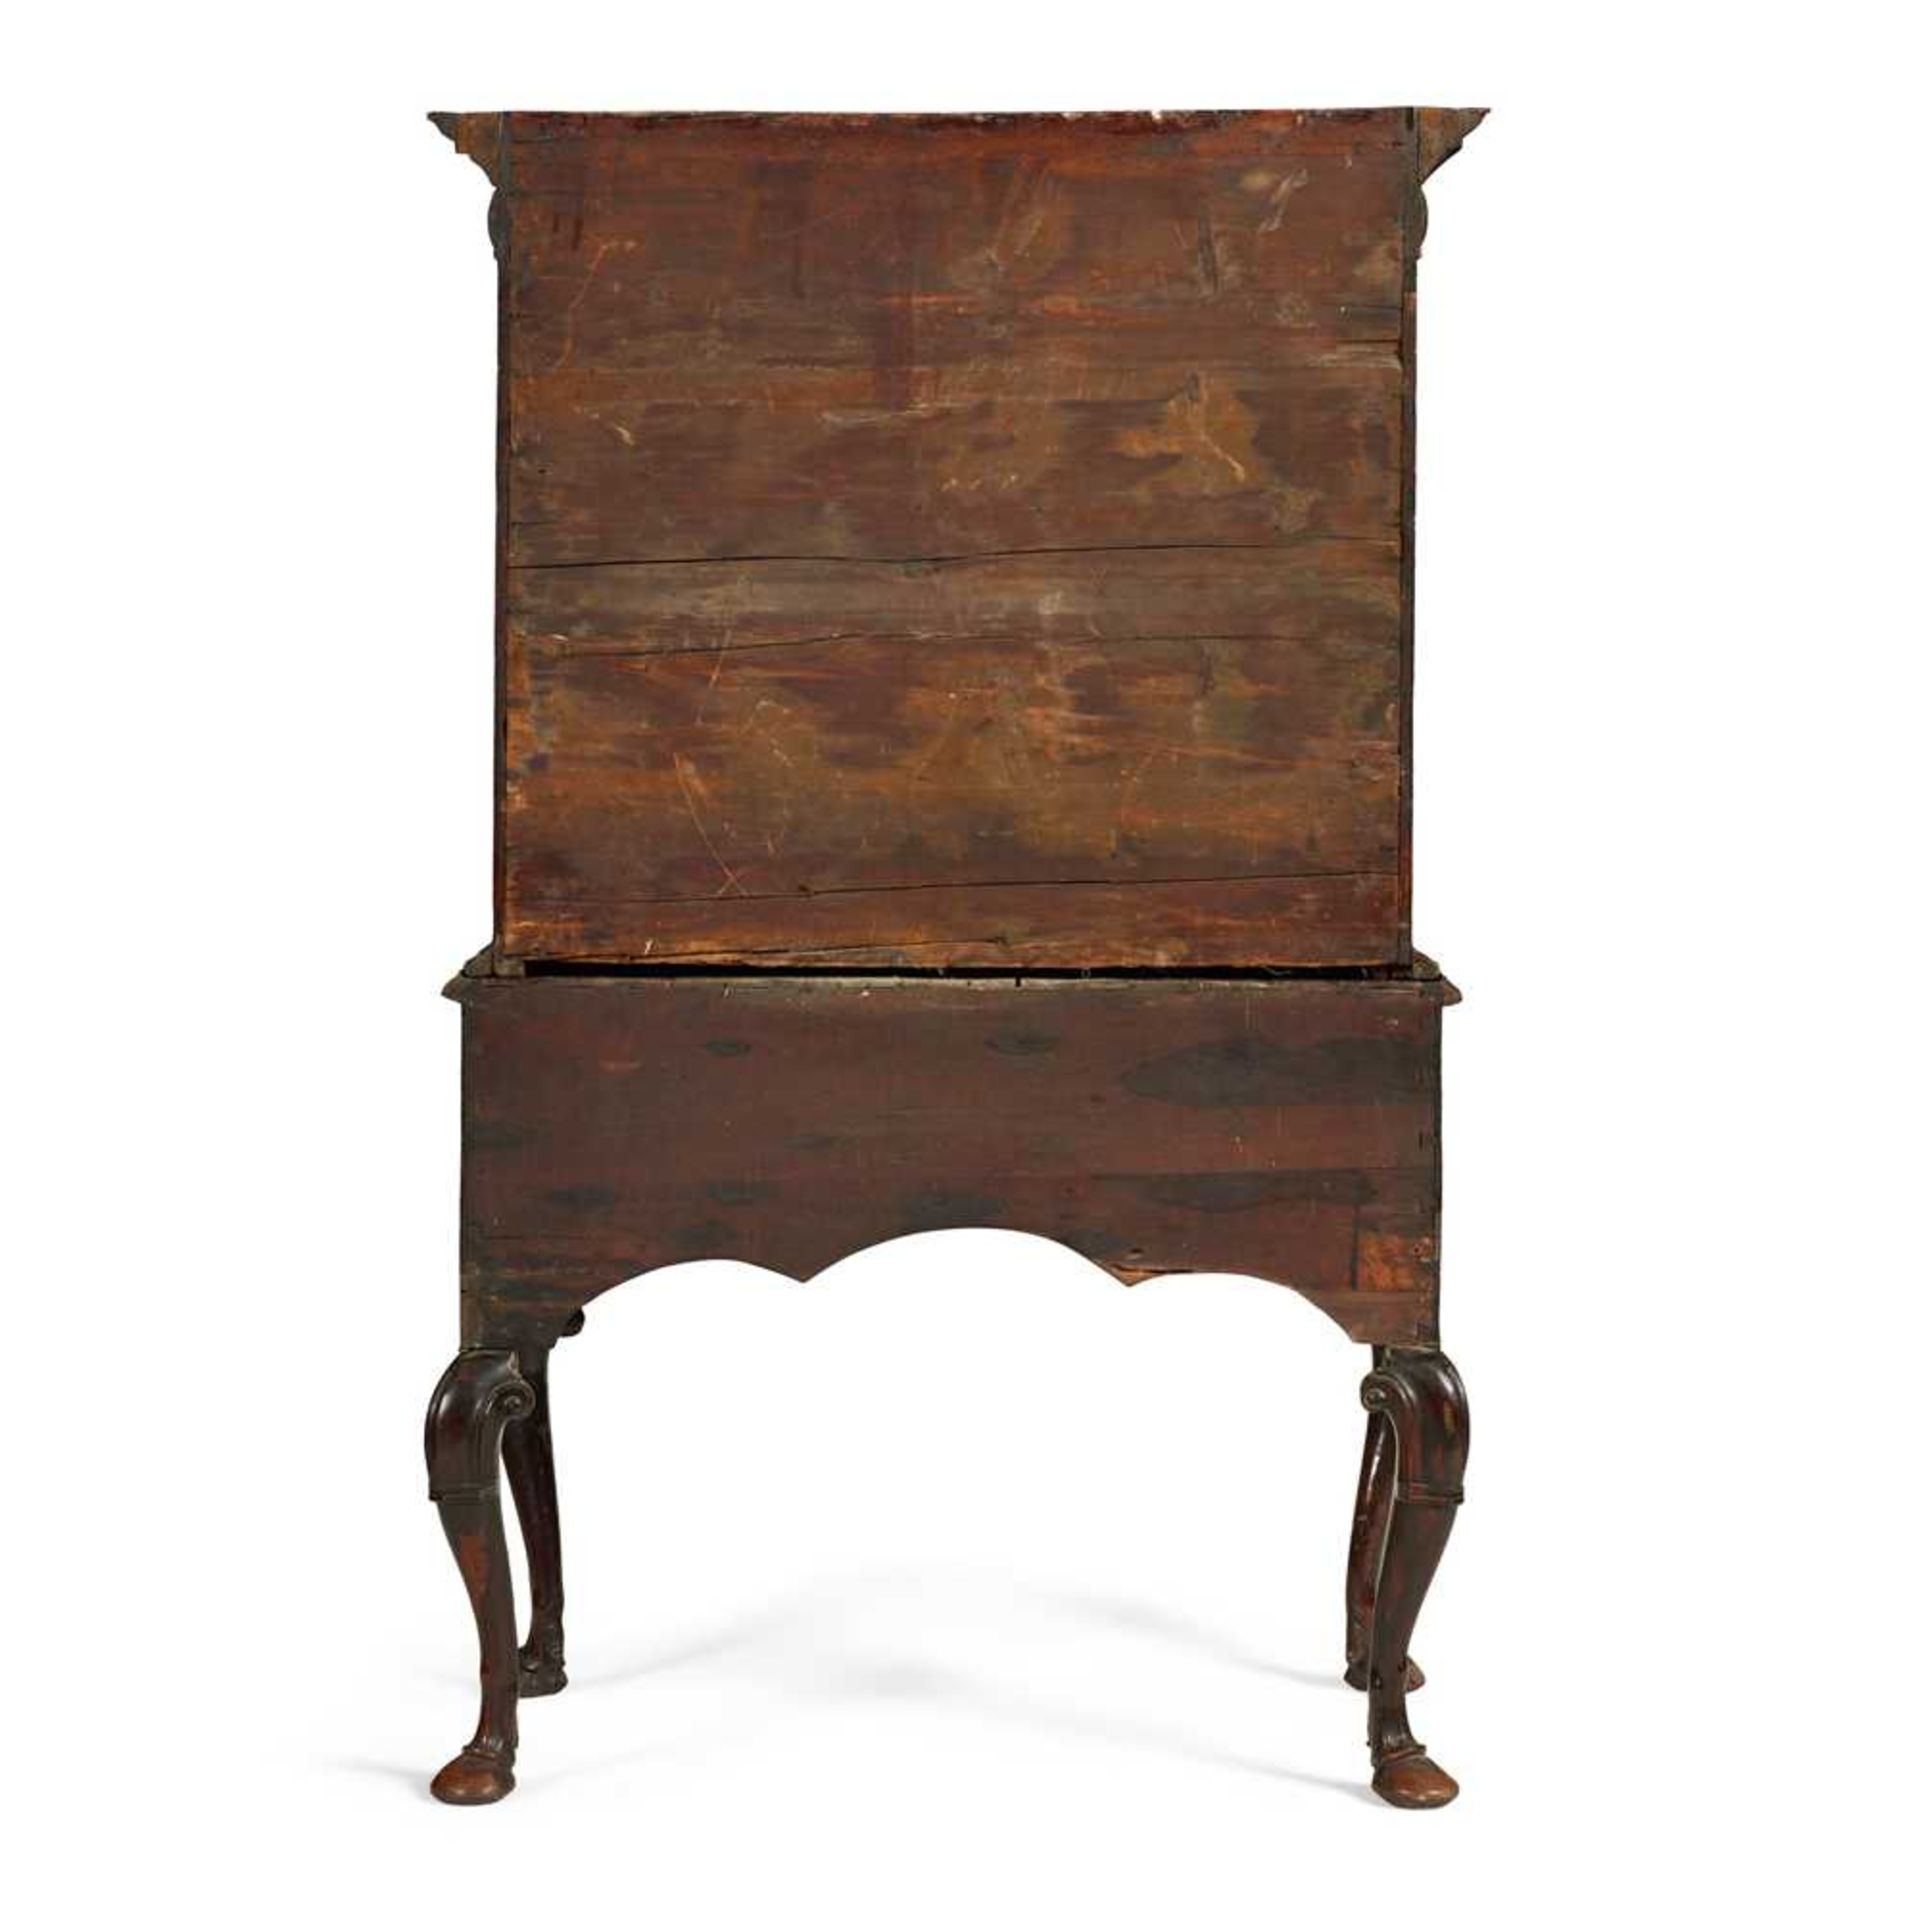 GEORGE I WALNUT CHEST-ON-STAND EARLY 18TH CENTURY - Image 2 of 2